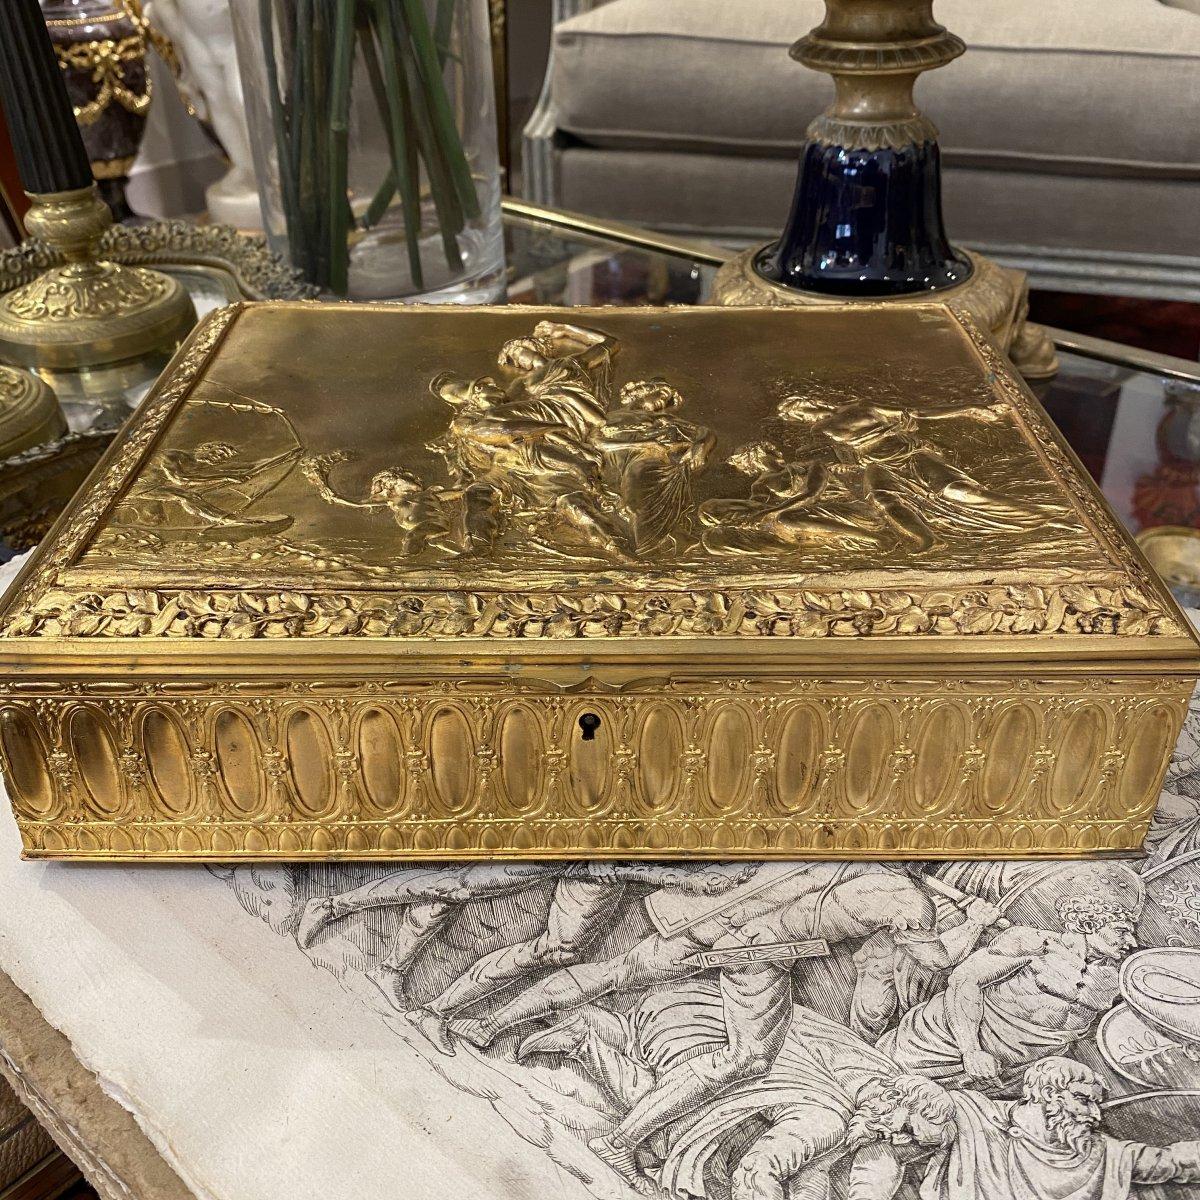 We present you this exquisite gilded bronze box hailing from the Napoleon III period. It represents a scene from Classical Antiquity that captures the romantic rendezvous between two lovers, set against a backdrop of a woman harvesting on the right